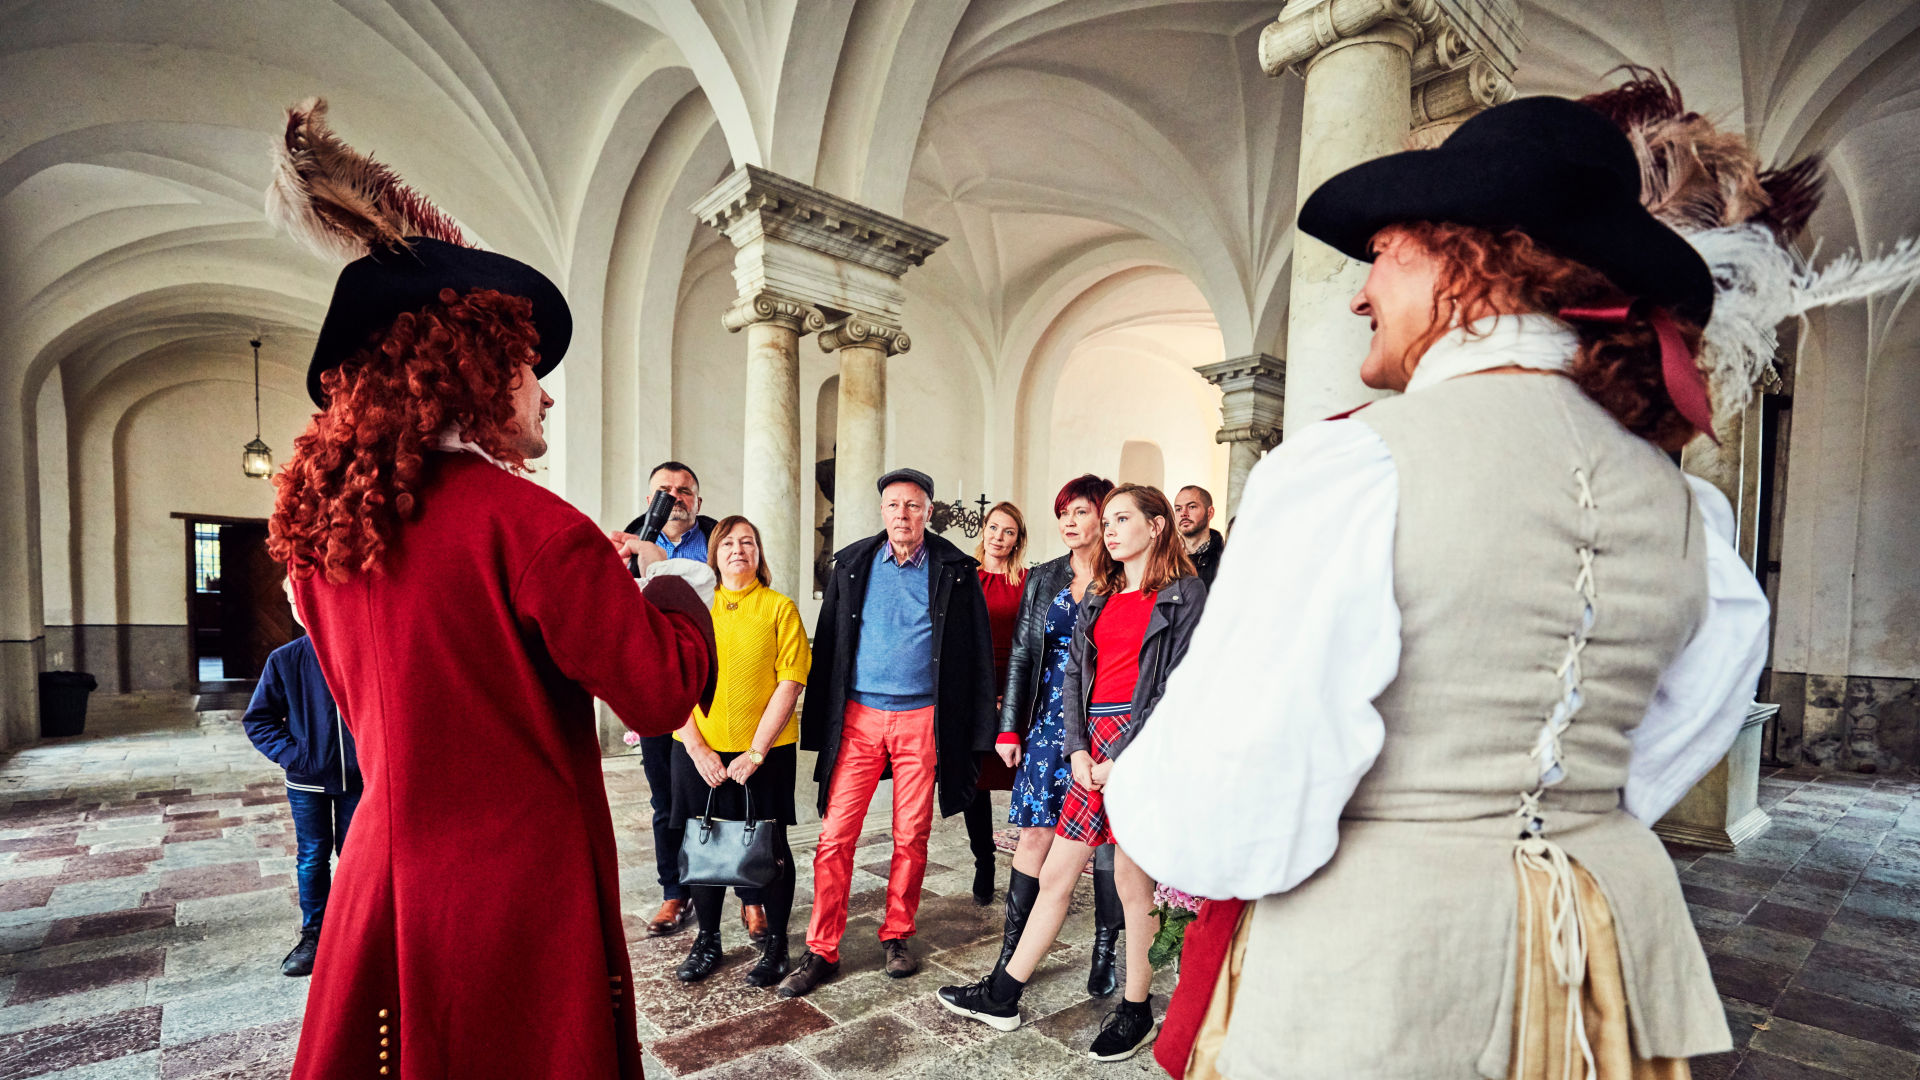  Two guides give a tour for a group in the castle's entrance floor.